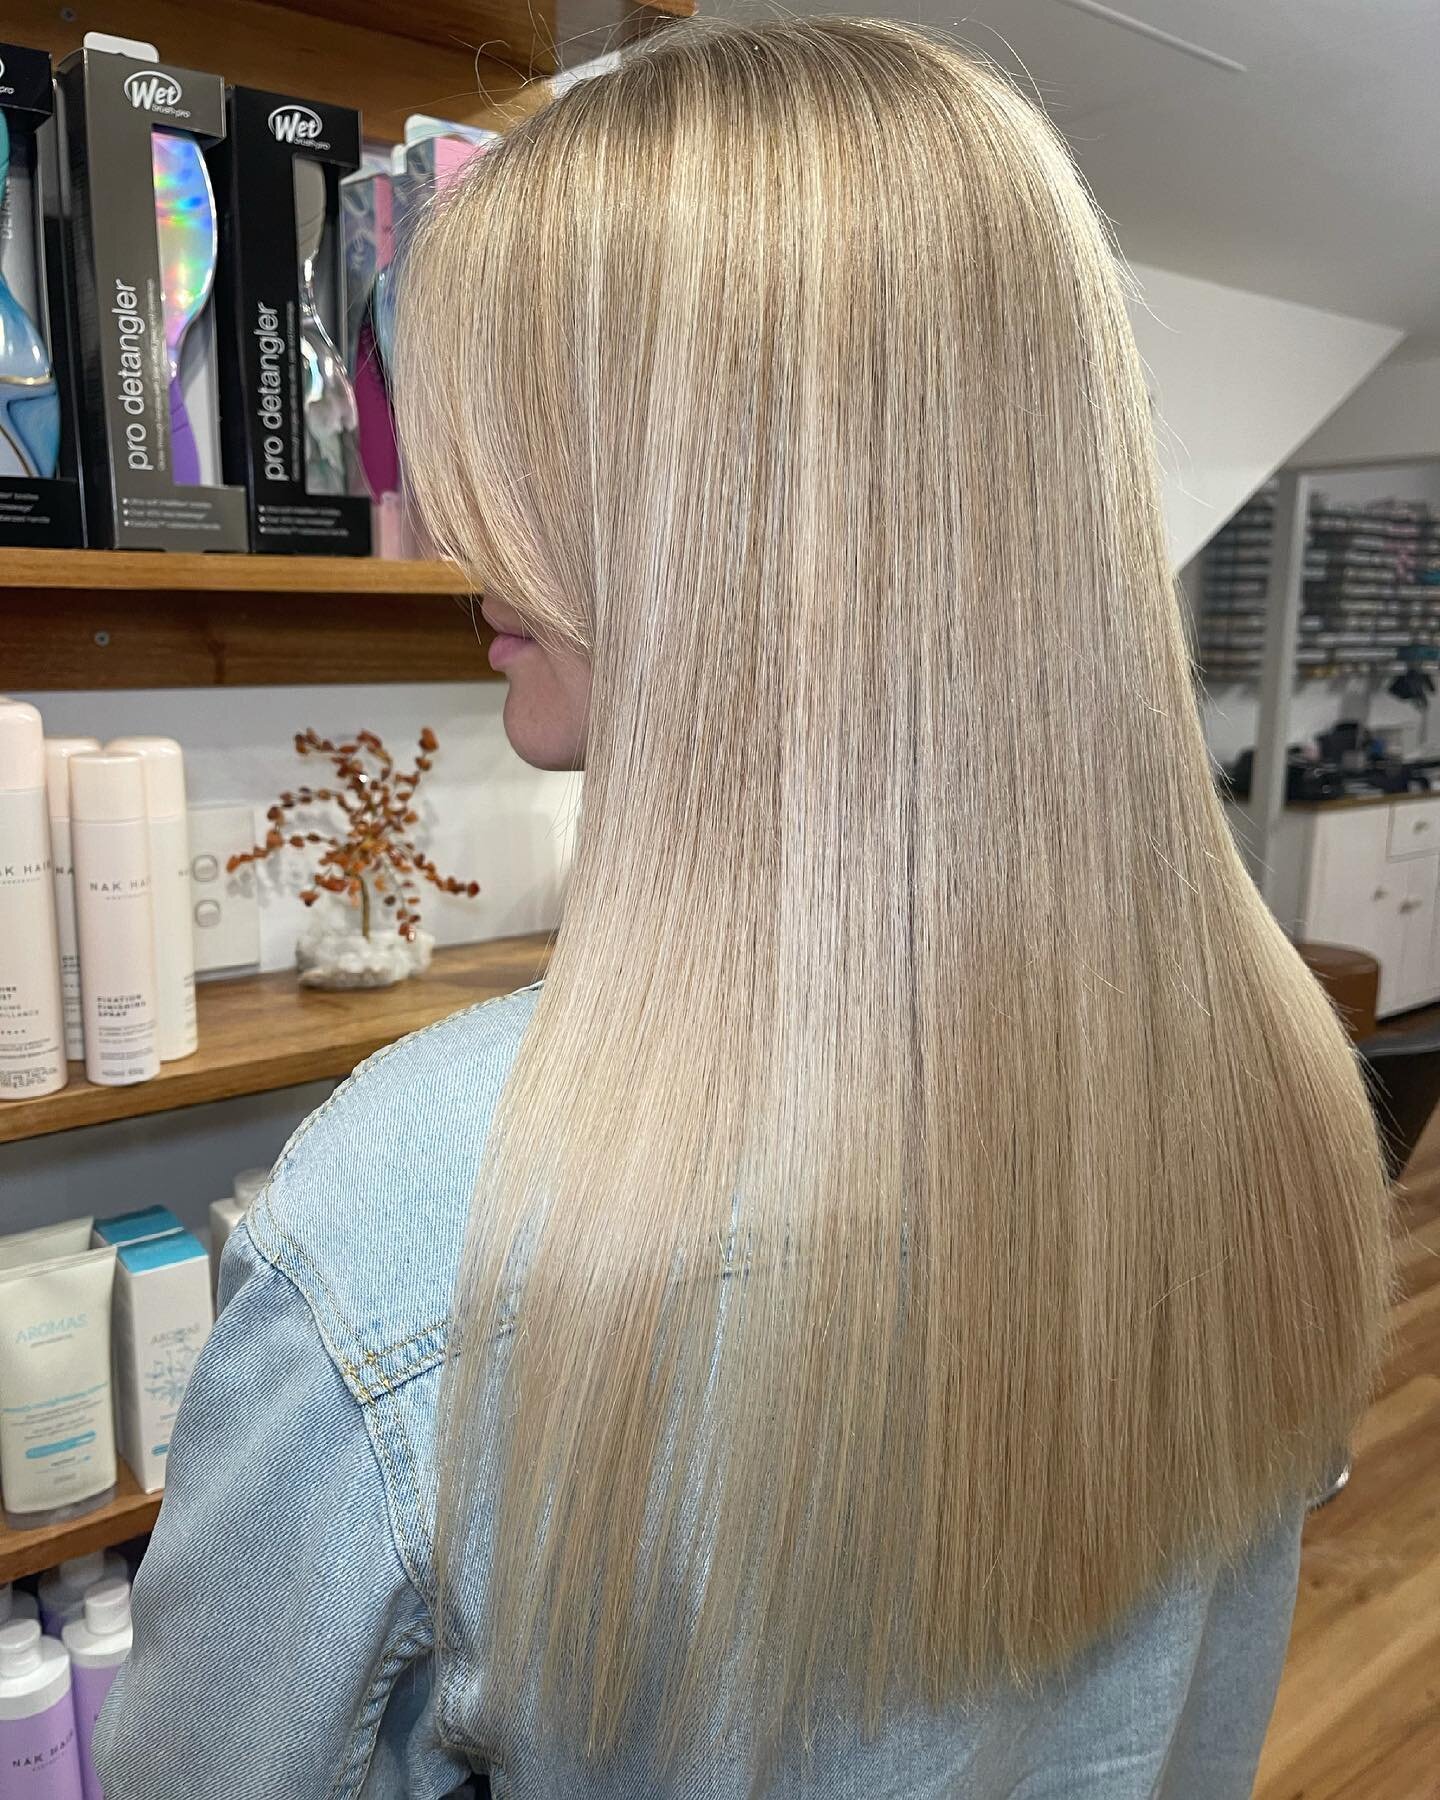 Full head of foils using a mixture of teased medium weaves and baby lights to achieve more coverage of blonde as it was the first full head in a long time! I also toned with a permanent colour to lift the natural hair left out around the foils while 